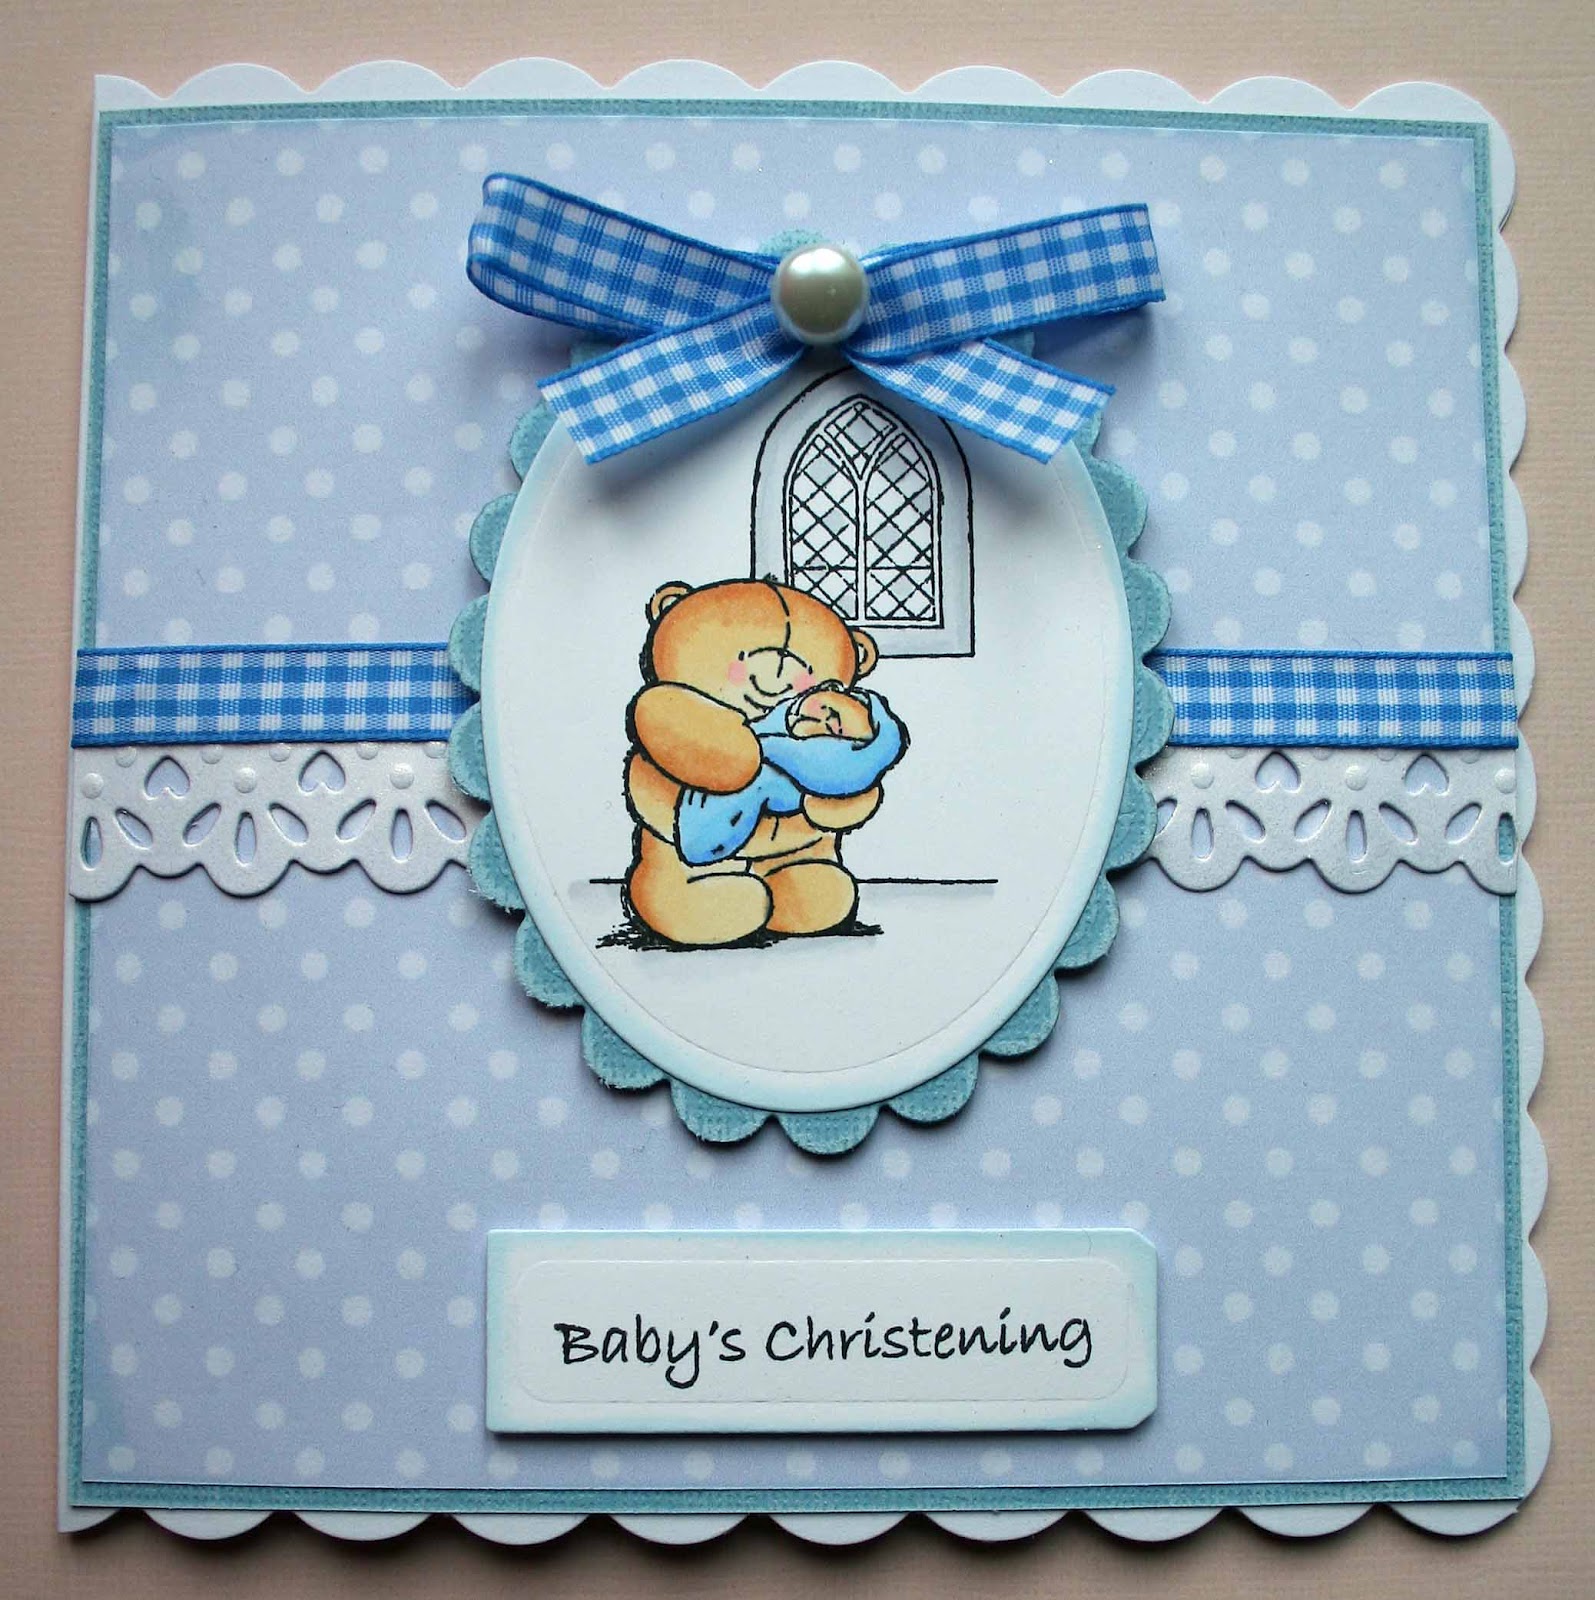 lynsey-s-place-a-christening-card